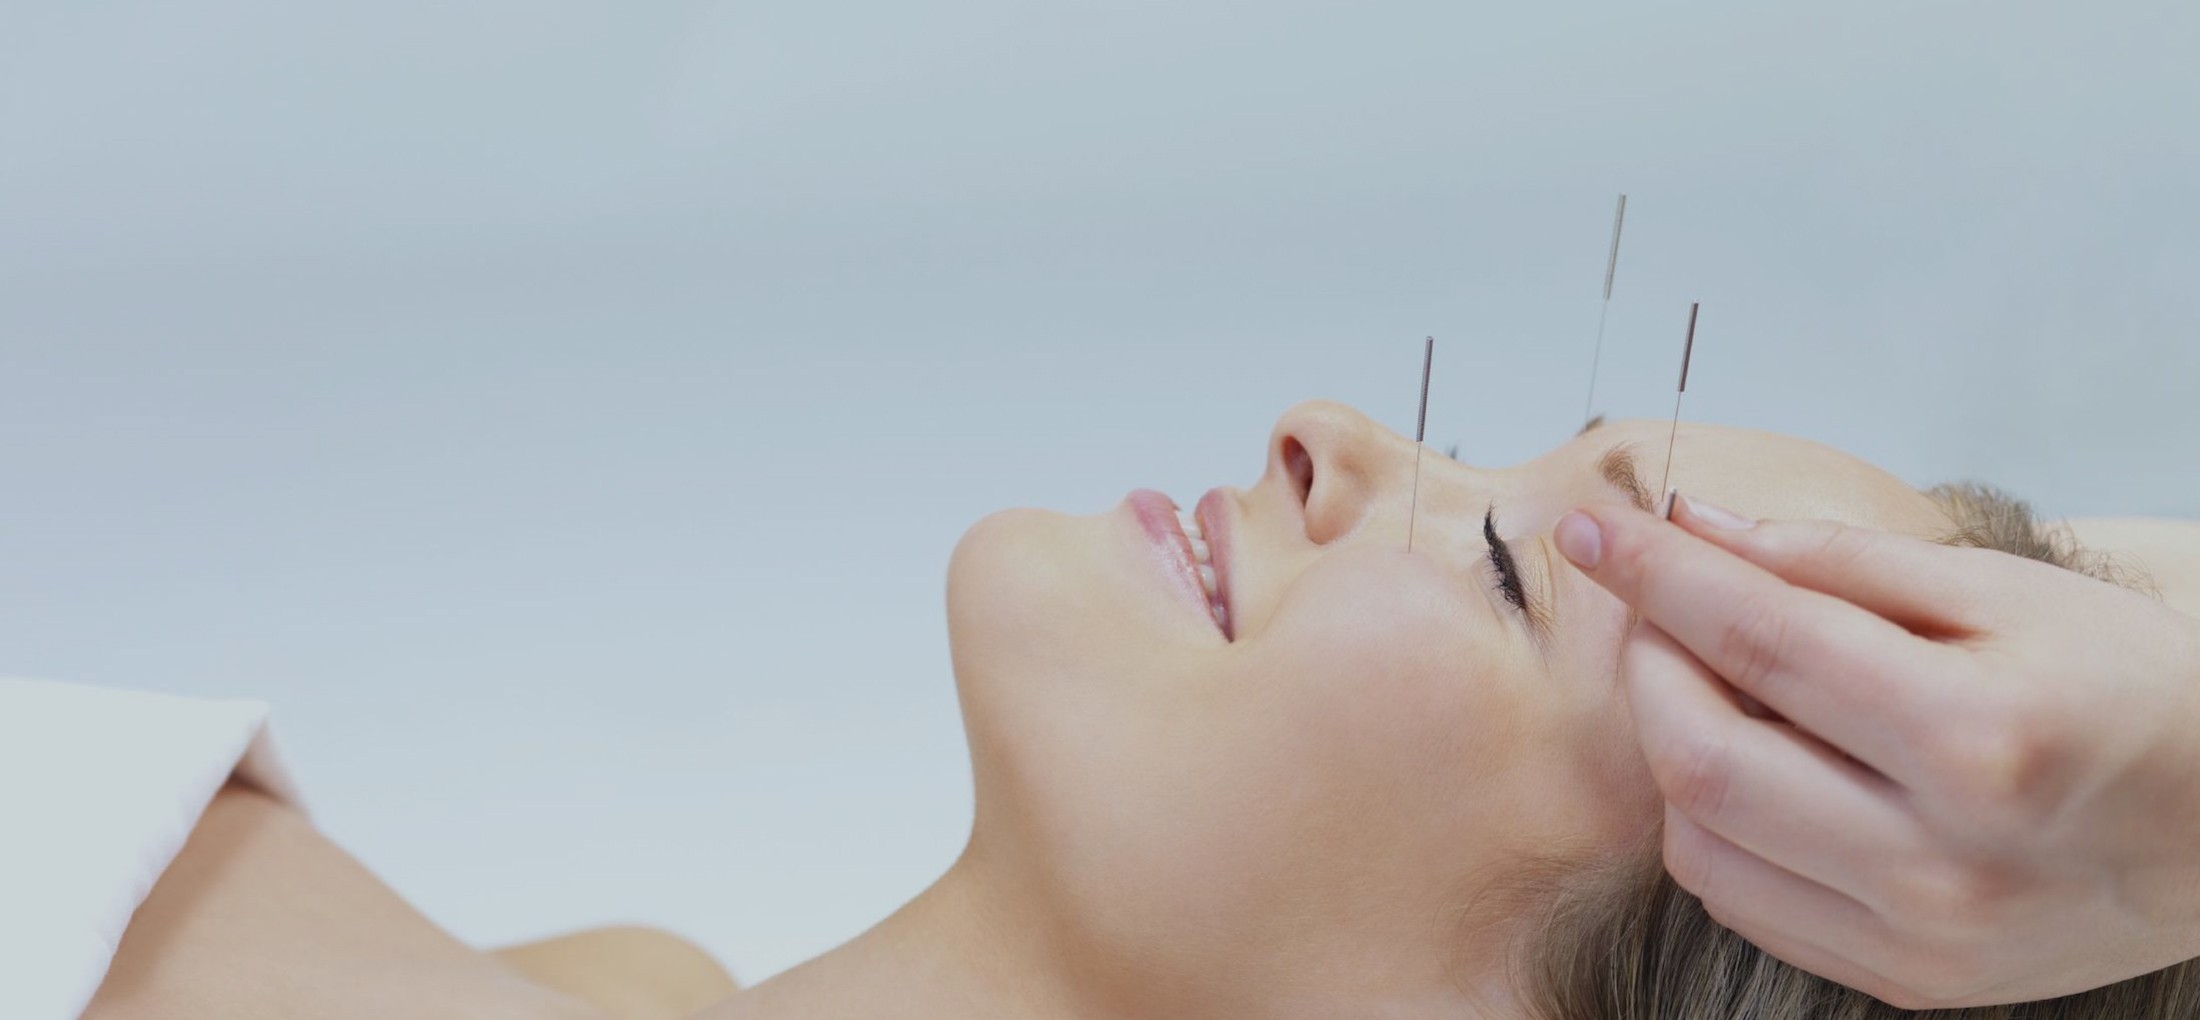 A woman getting acupuncture on her face